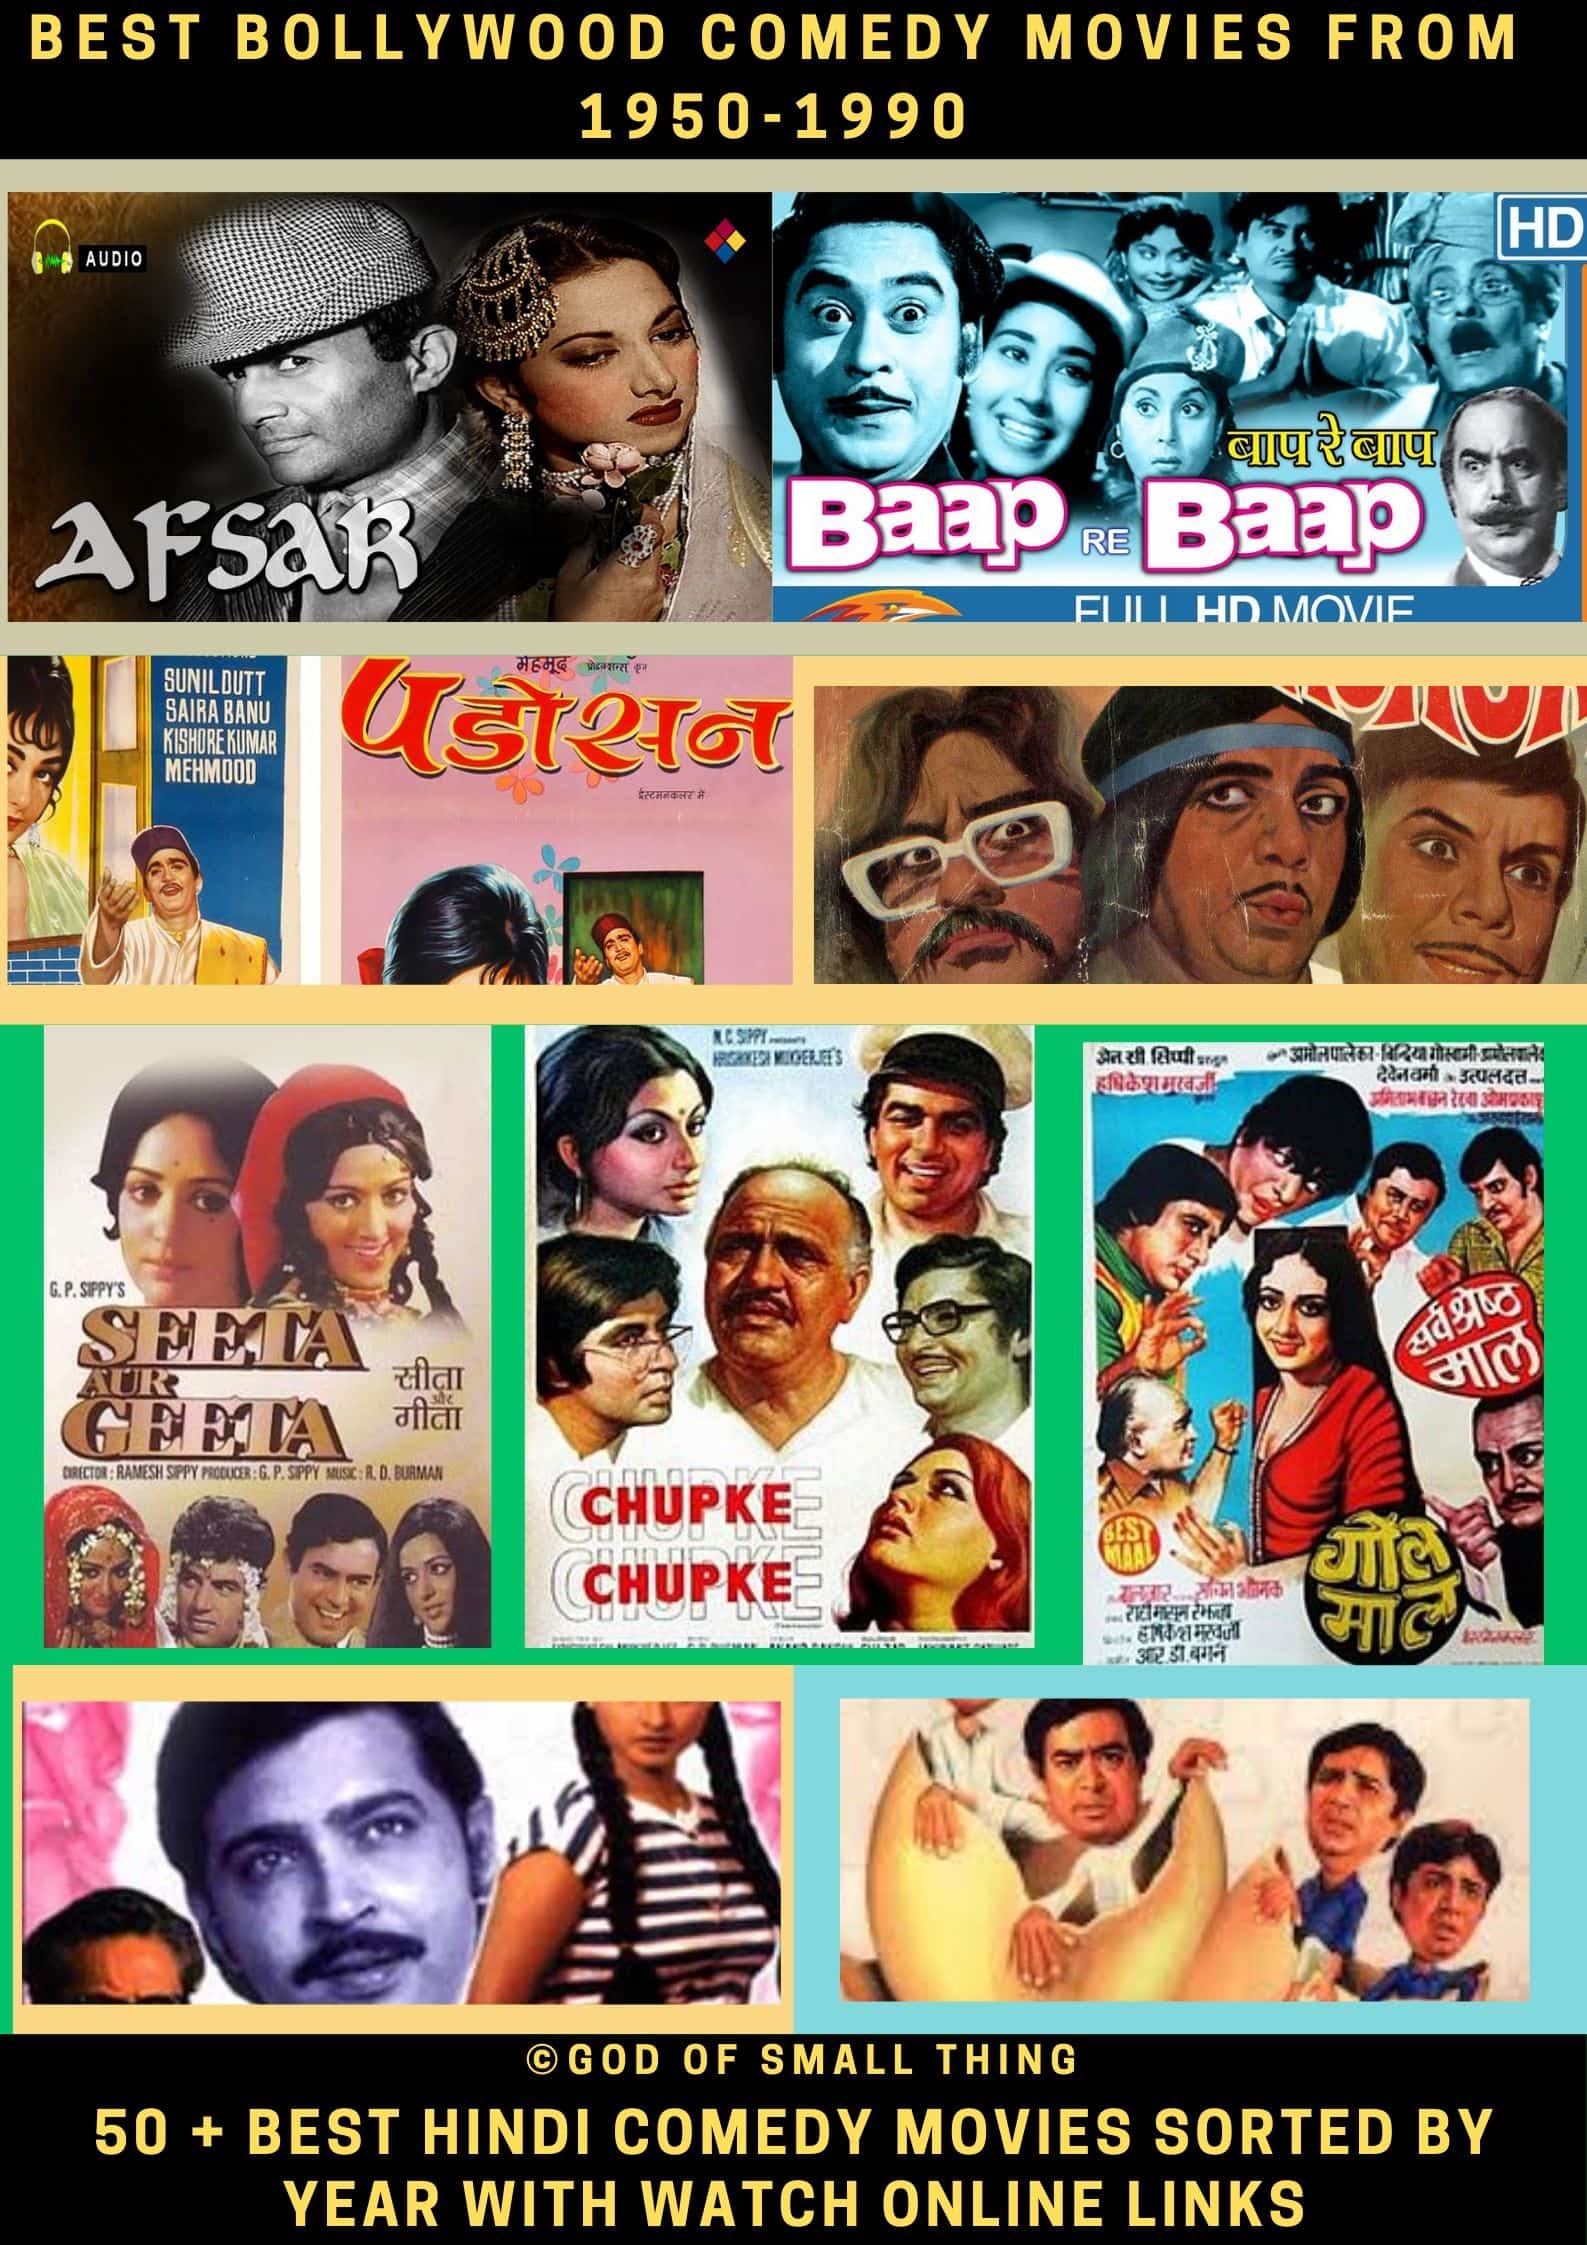 Best Bollywood comedy movies from 1950-1990